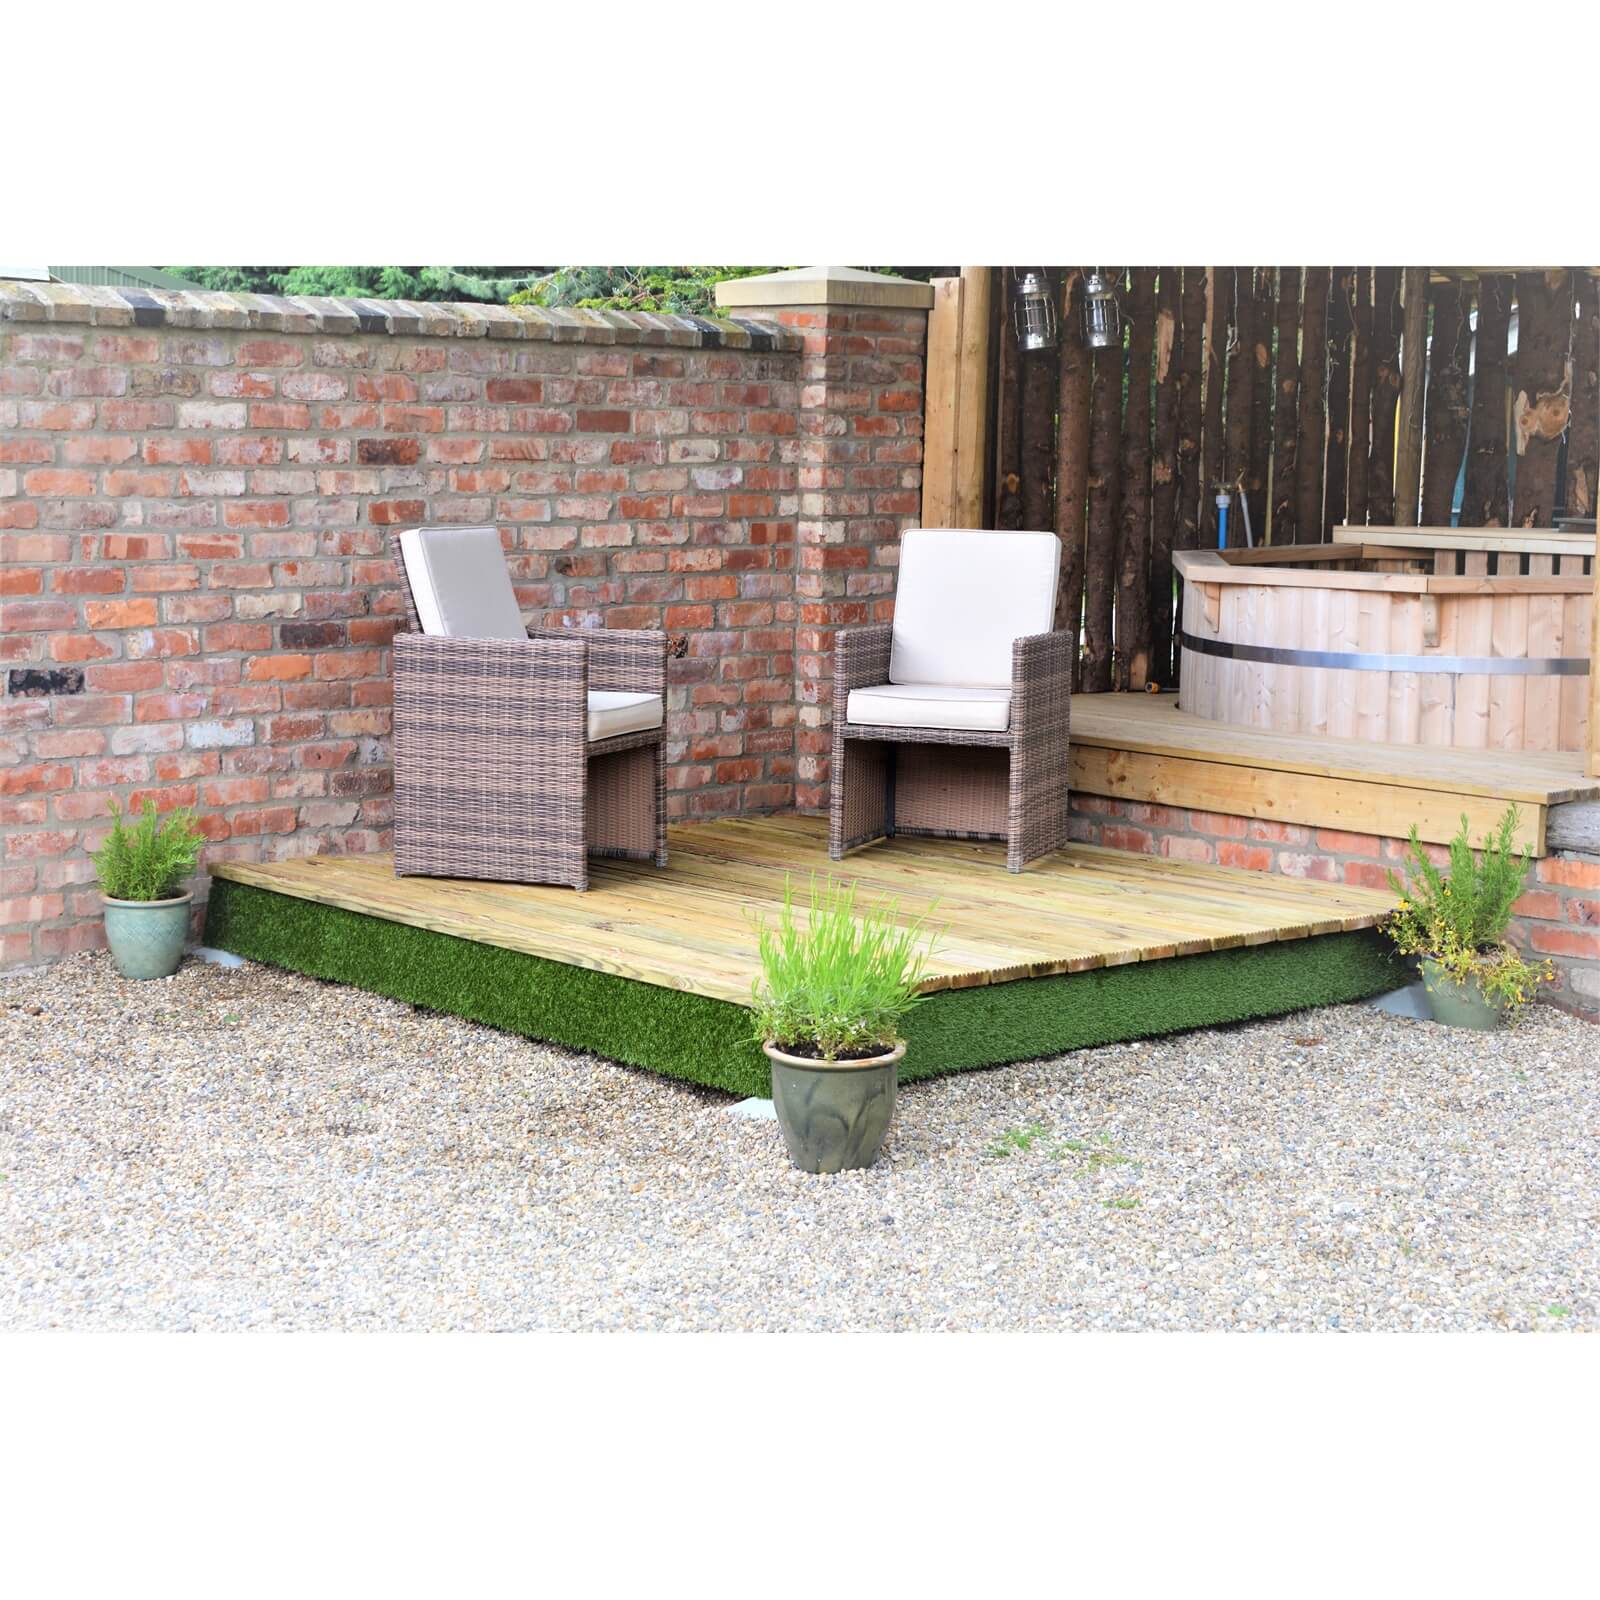 Photo of Swift Deck Complete Decking Kit - 4.75 X 4.7m